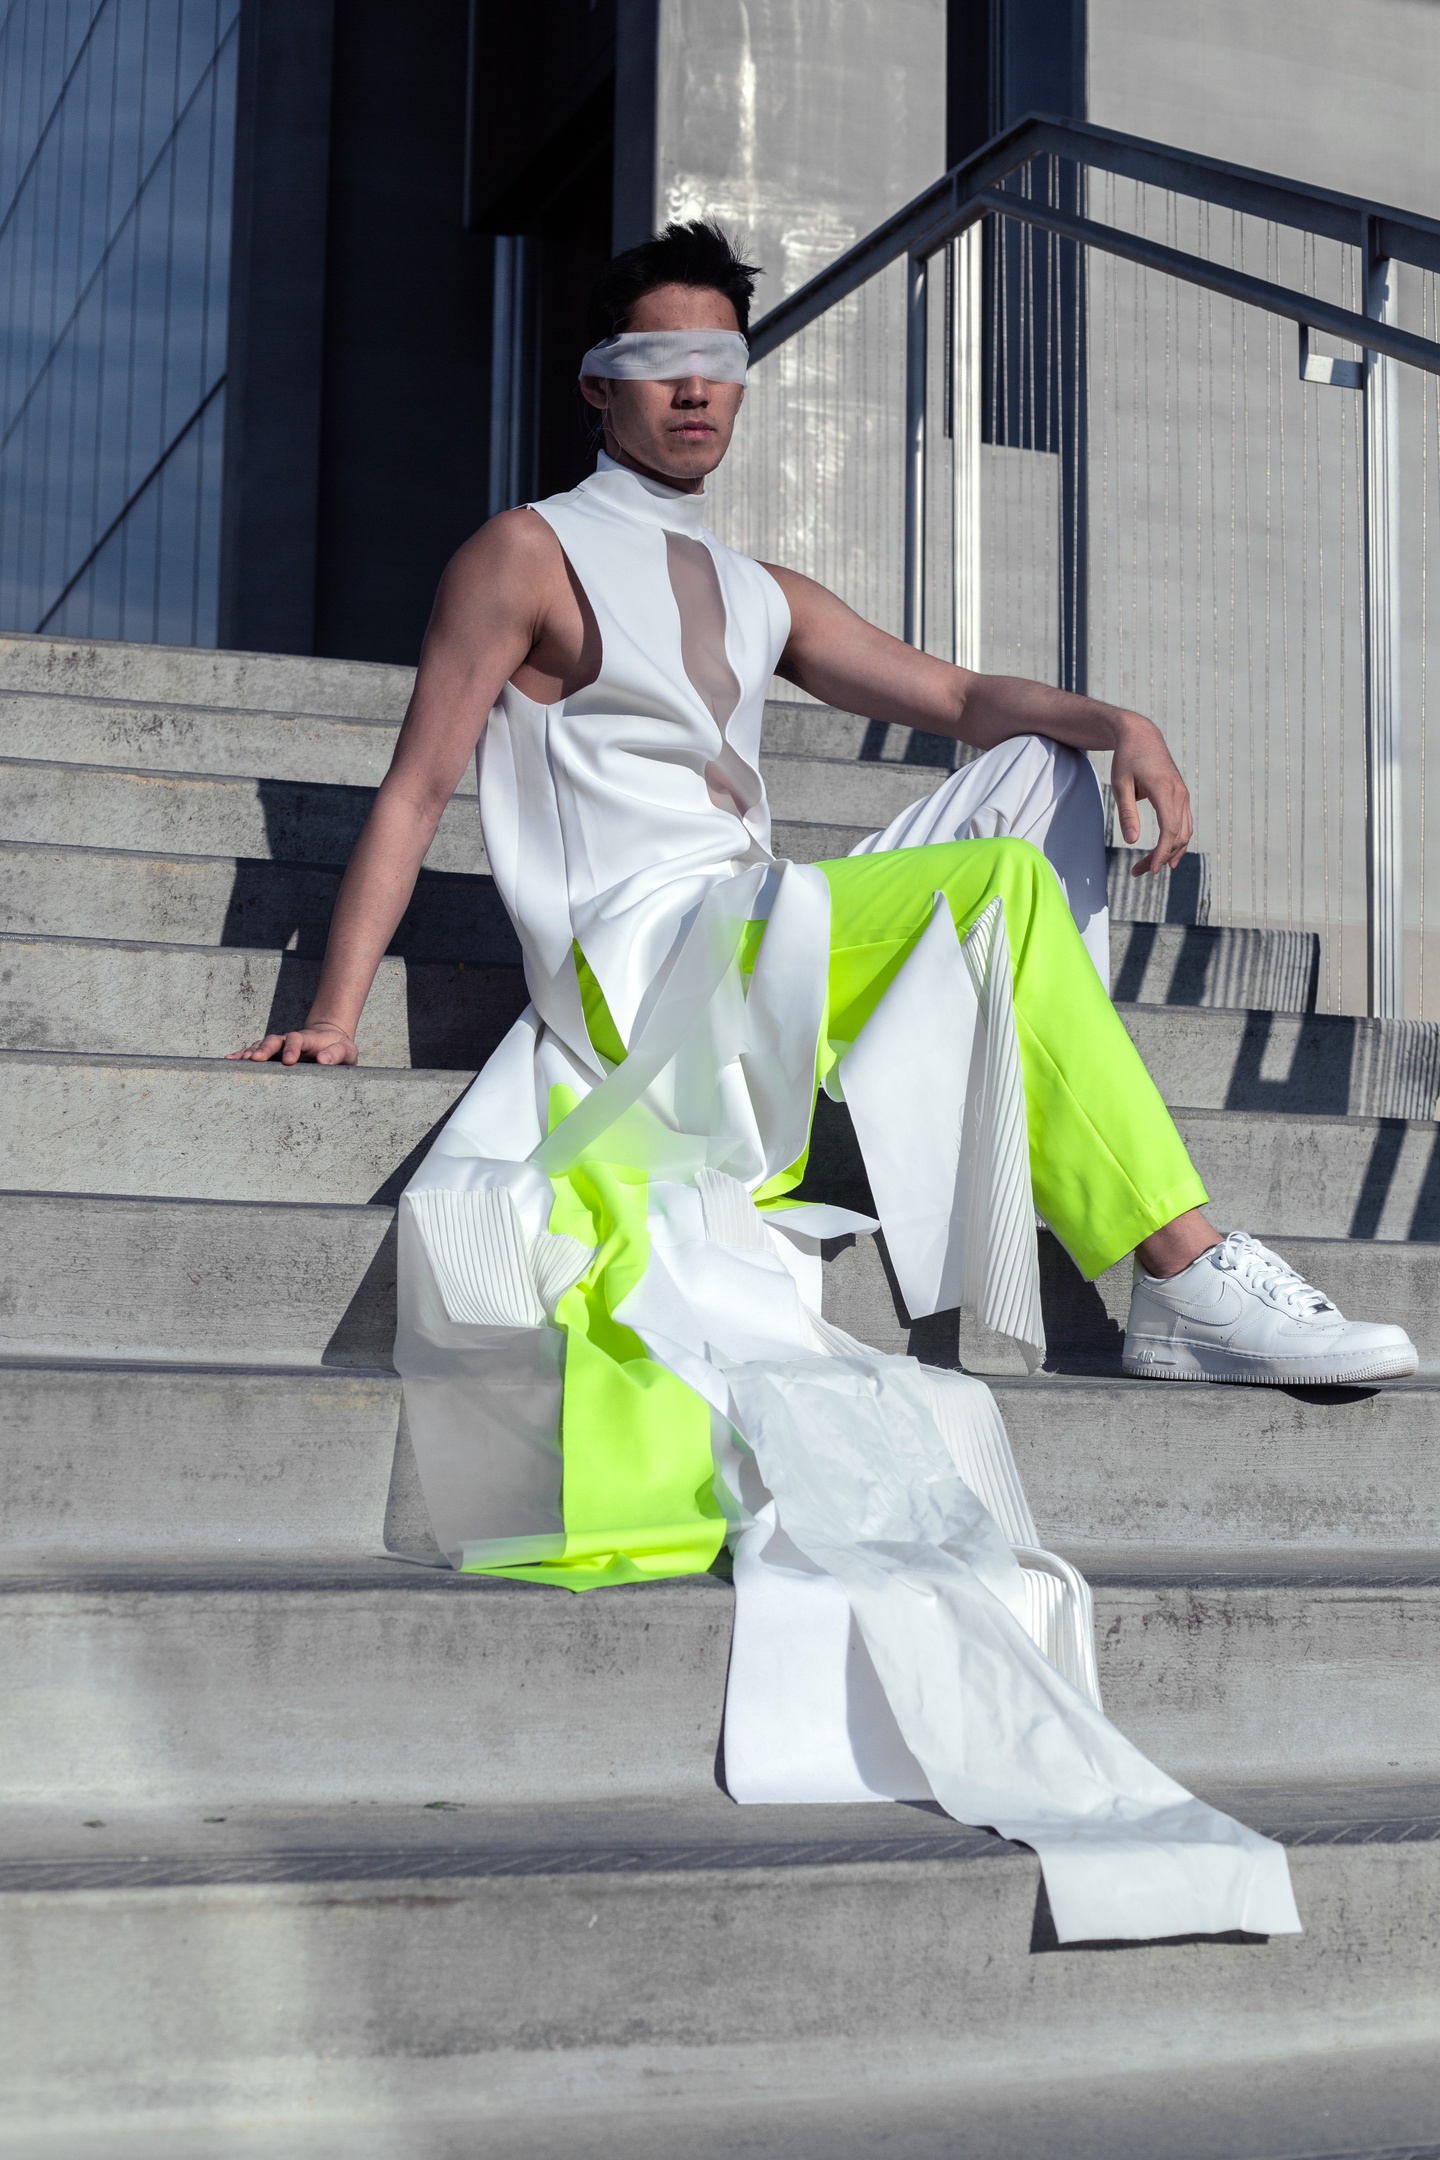 Model sits on concrete steps wearing a high-necked white sleeveless shirt with a see-through gauze panel down the front. The pants are neon green. The shirt and pants both have trailing floor-length strips of fabric in white, gauze, and neon green attached. The model wears a strip of gauze tied across their eyes.